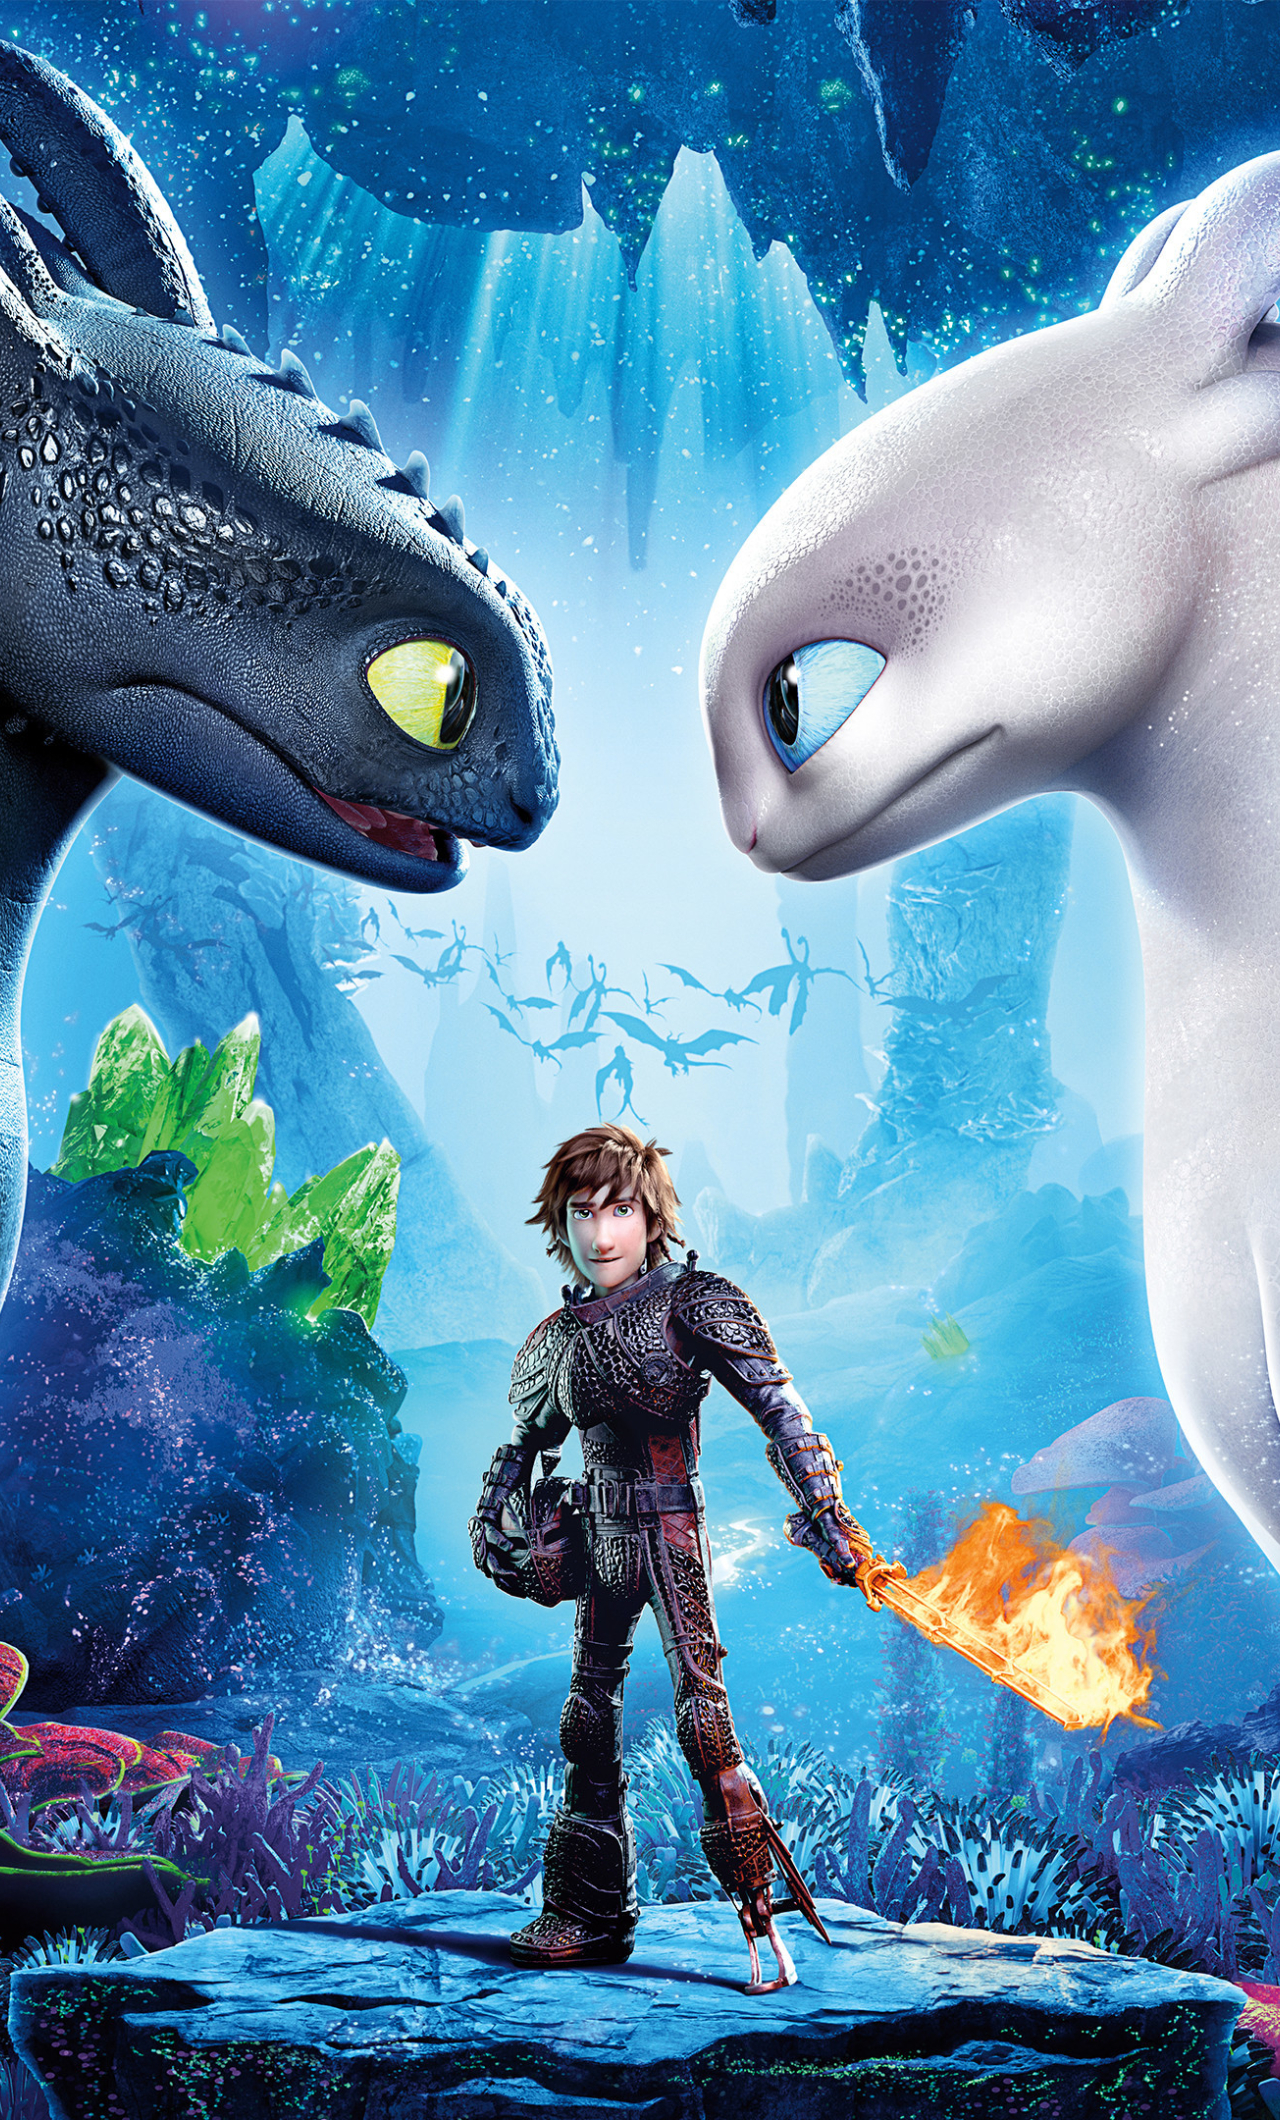 How To Train Your Dragon The Hidden World 2019 Movie Poster, HD 4K Wallpaper